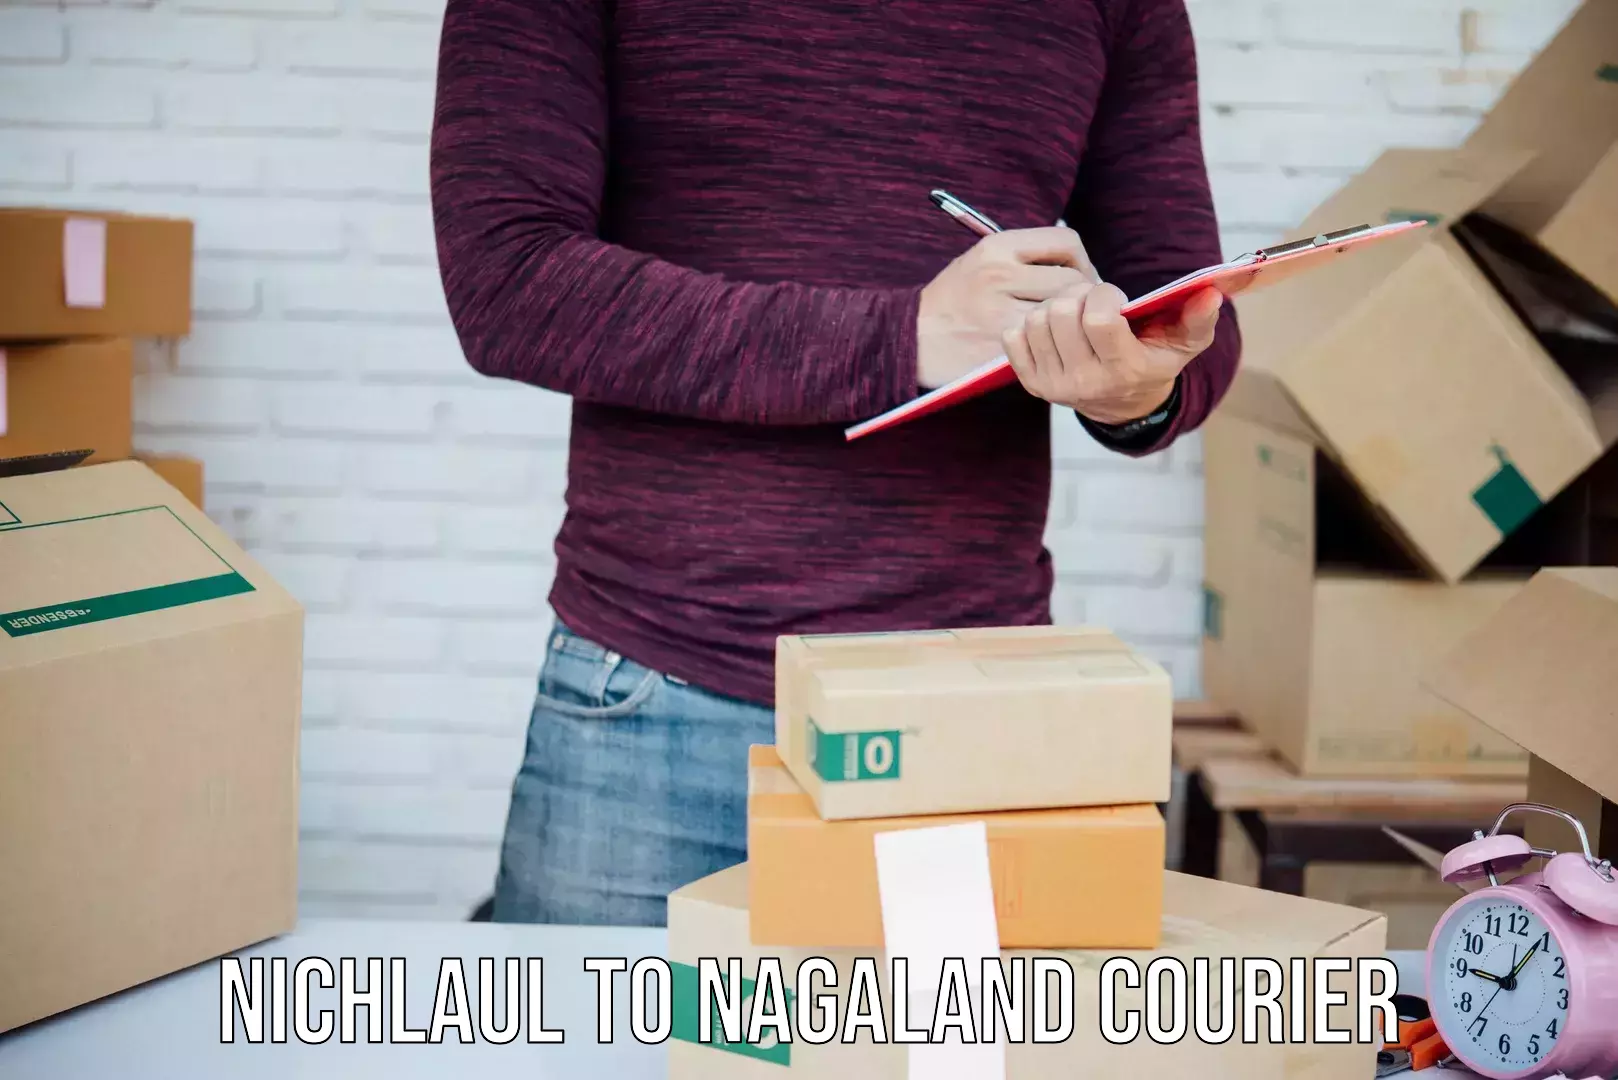 Automated parcel services Nichlaul to Mokokchung